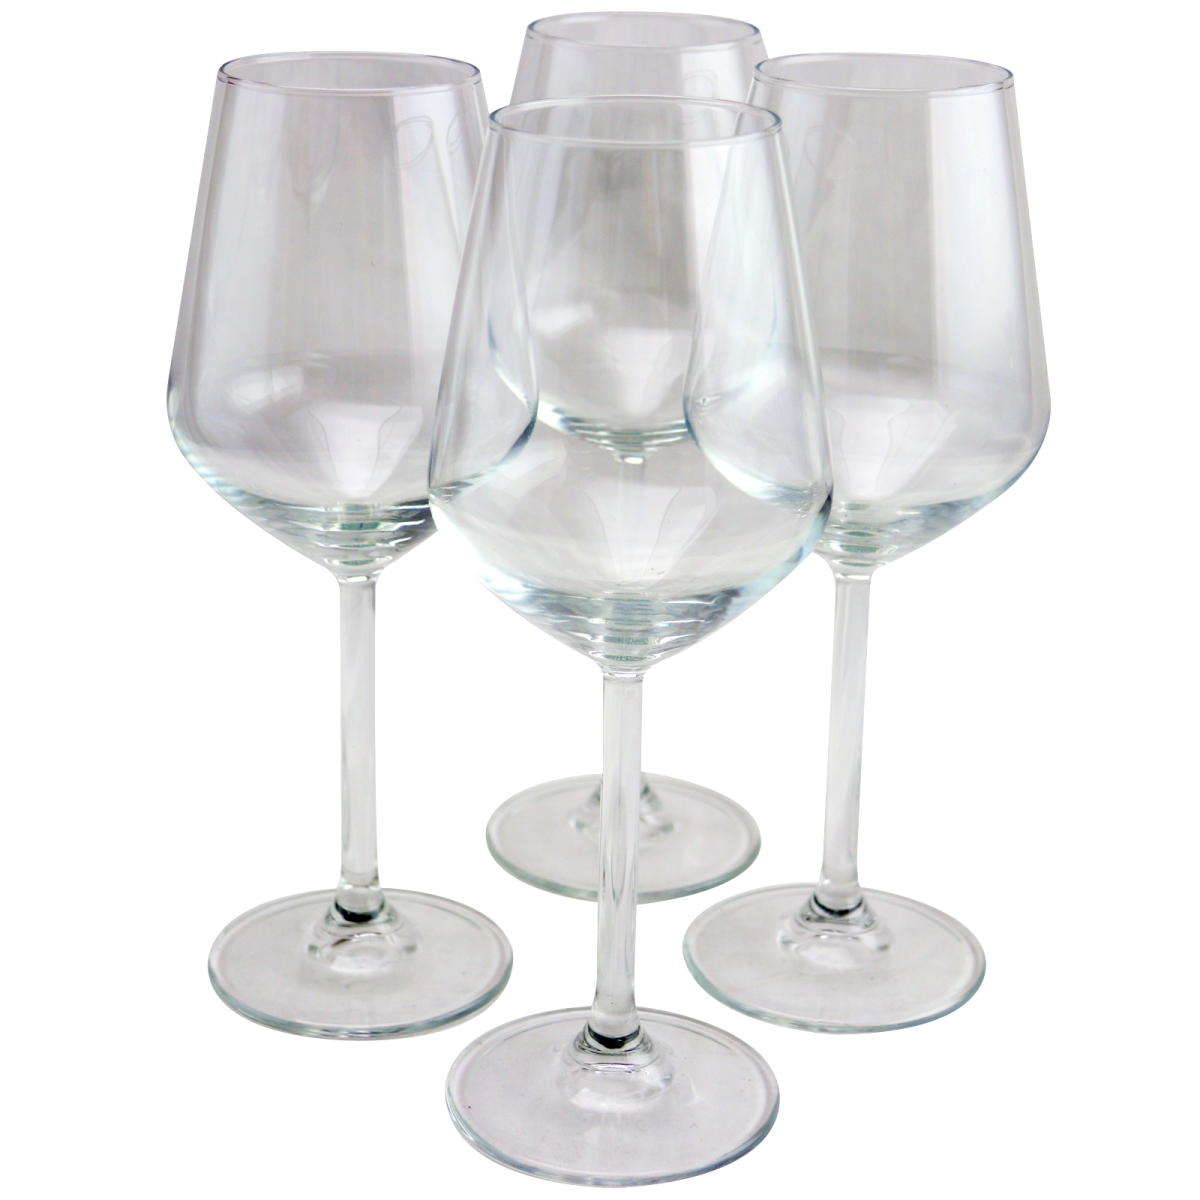 Picture of Pasabahce 440080-1046744 Allegra 11.75 oz Wine Glass Set - White - 4 Piece